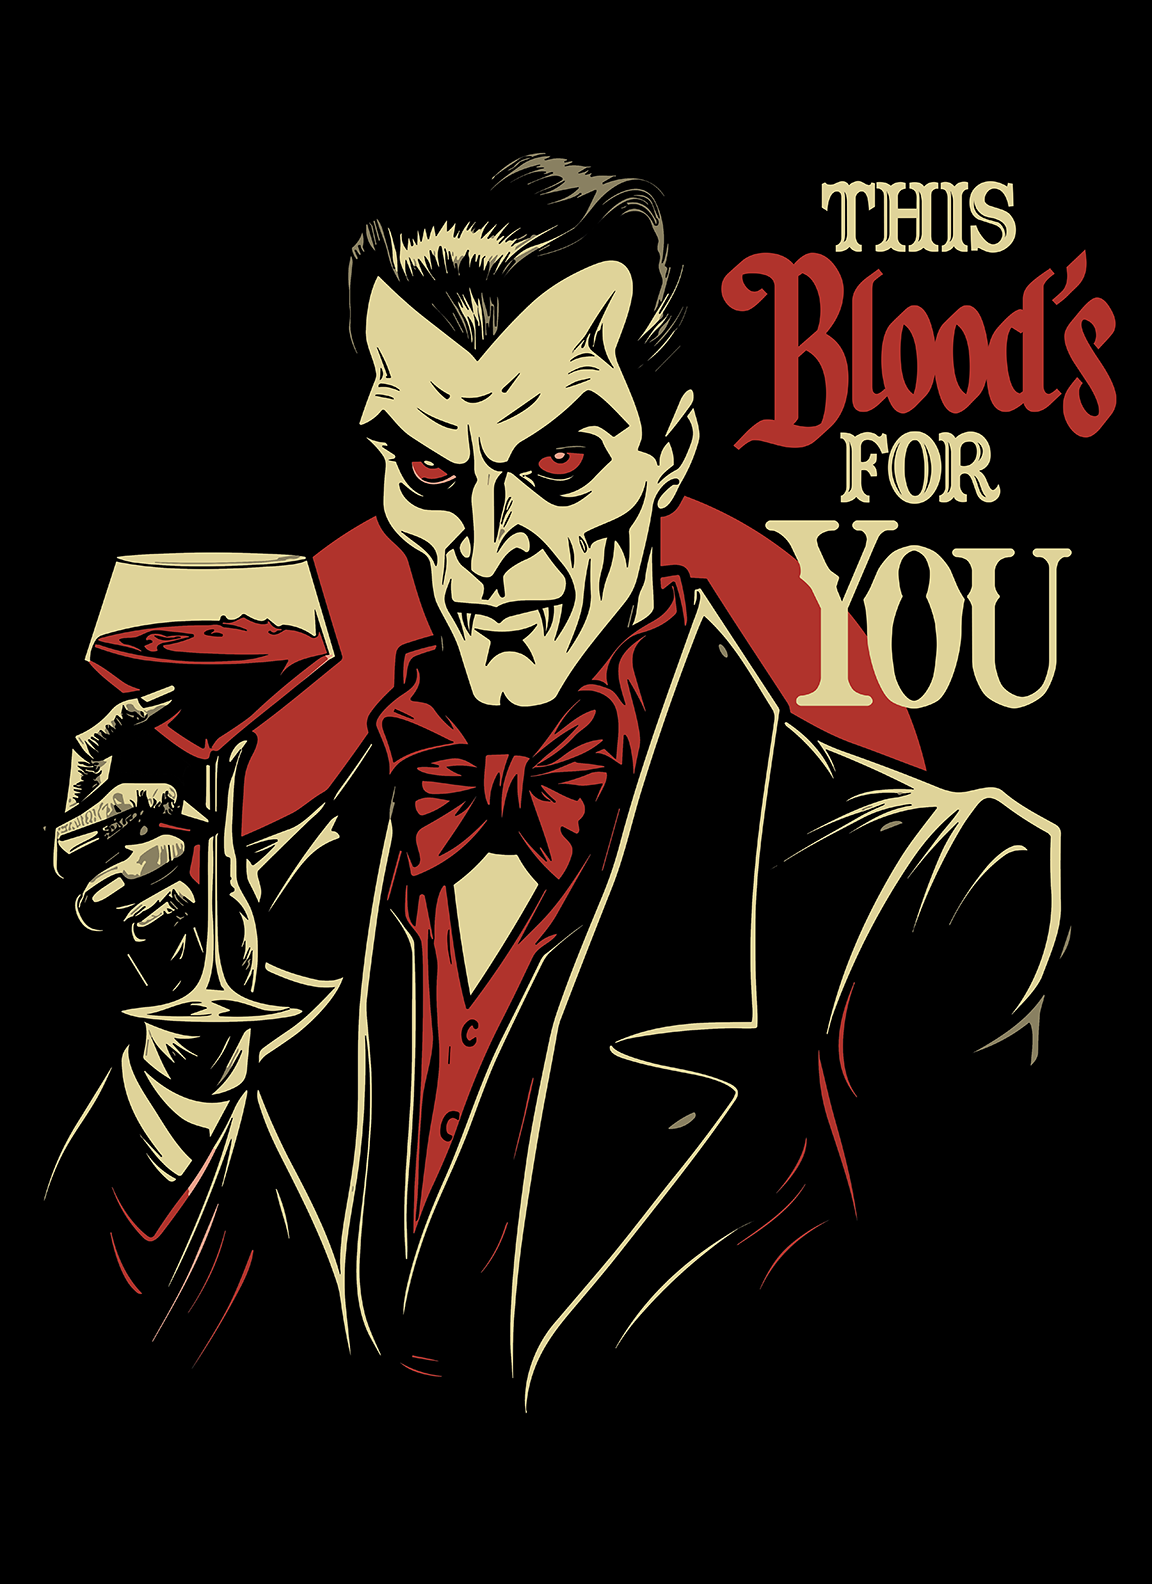 This Blood's For You Mens Halloween Graphic Tee